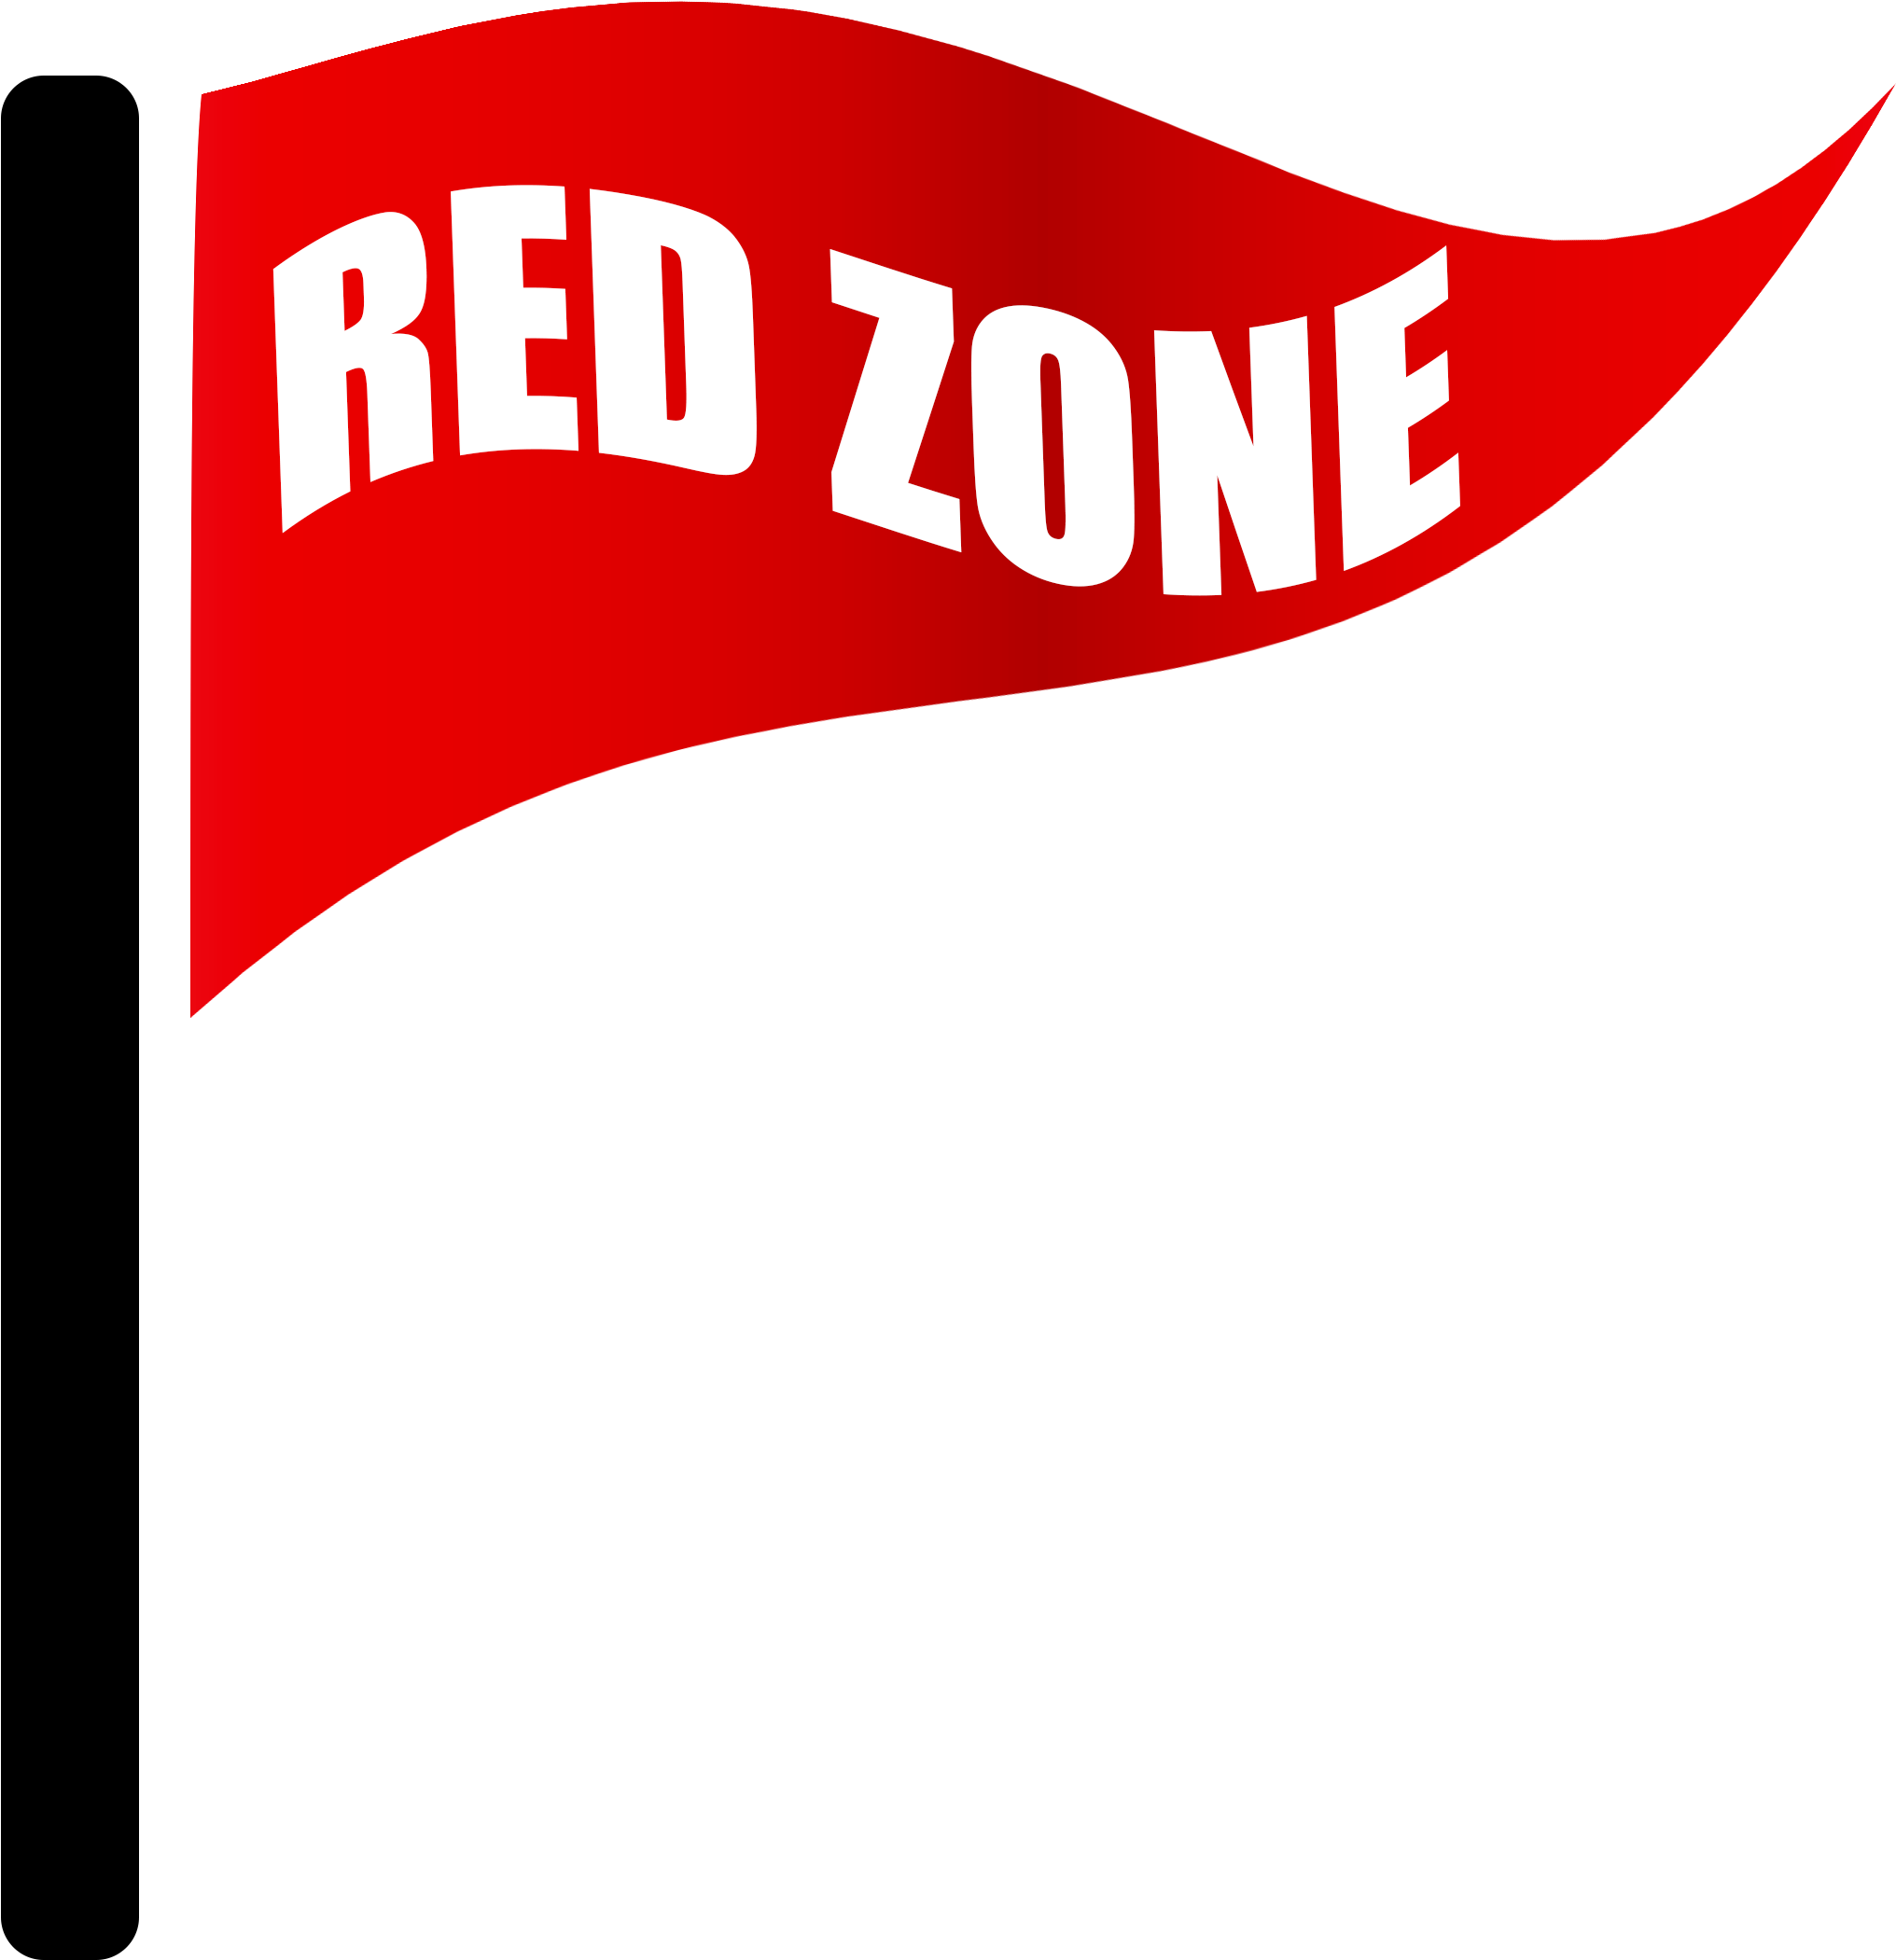 Red Zone (2700x2700)